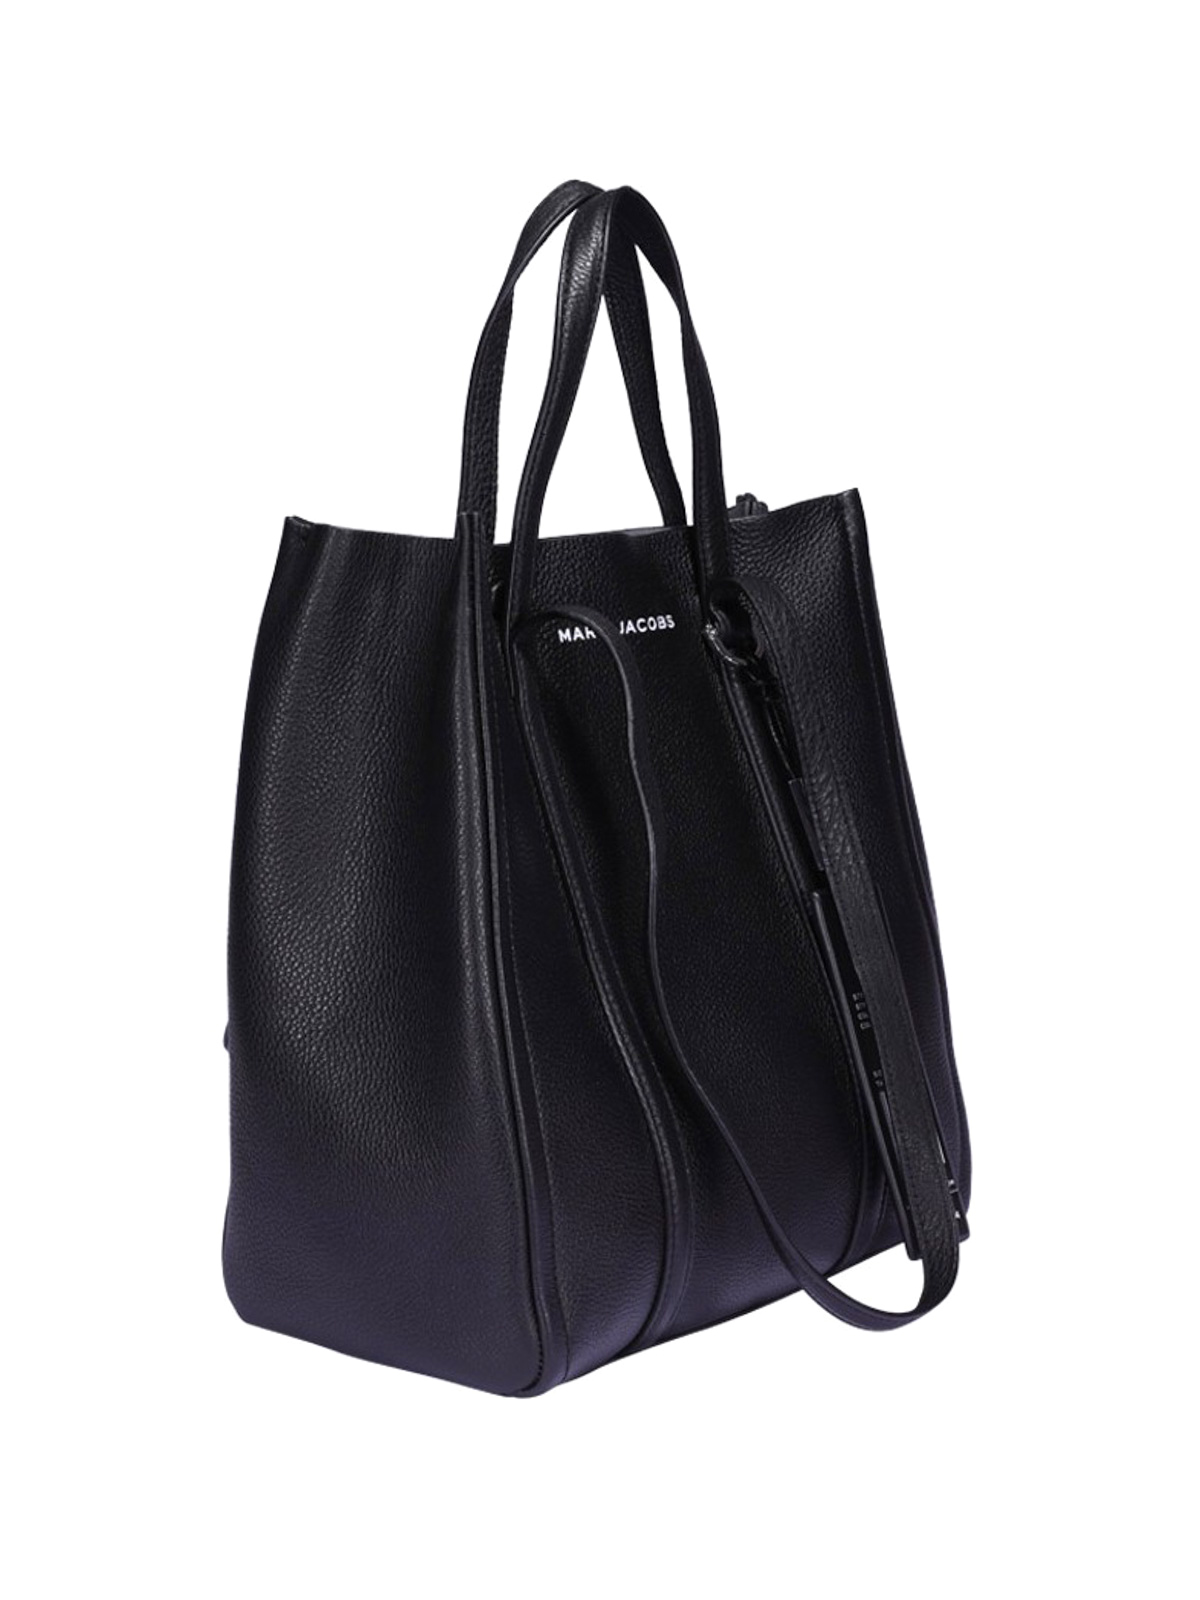 Marc Jacobs The Leather Tote Bag Black, Tote